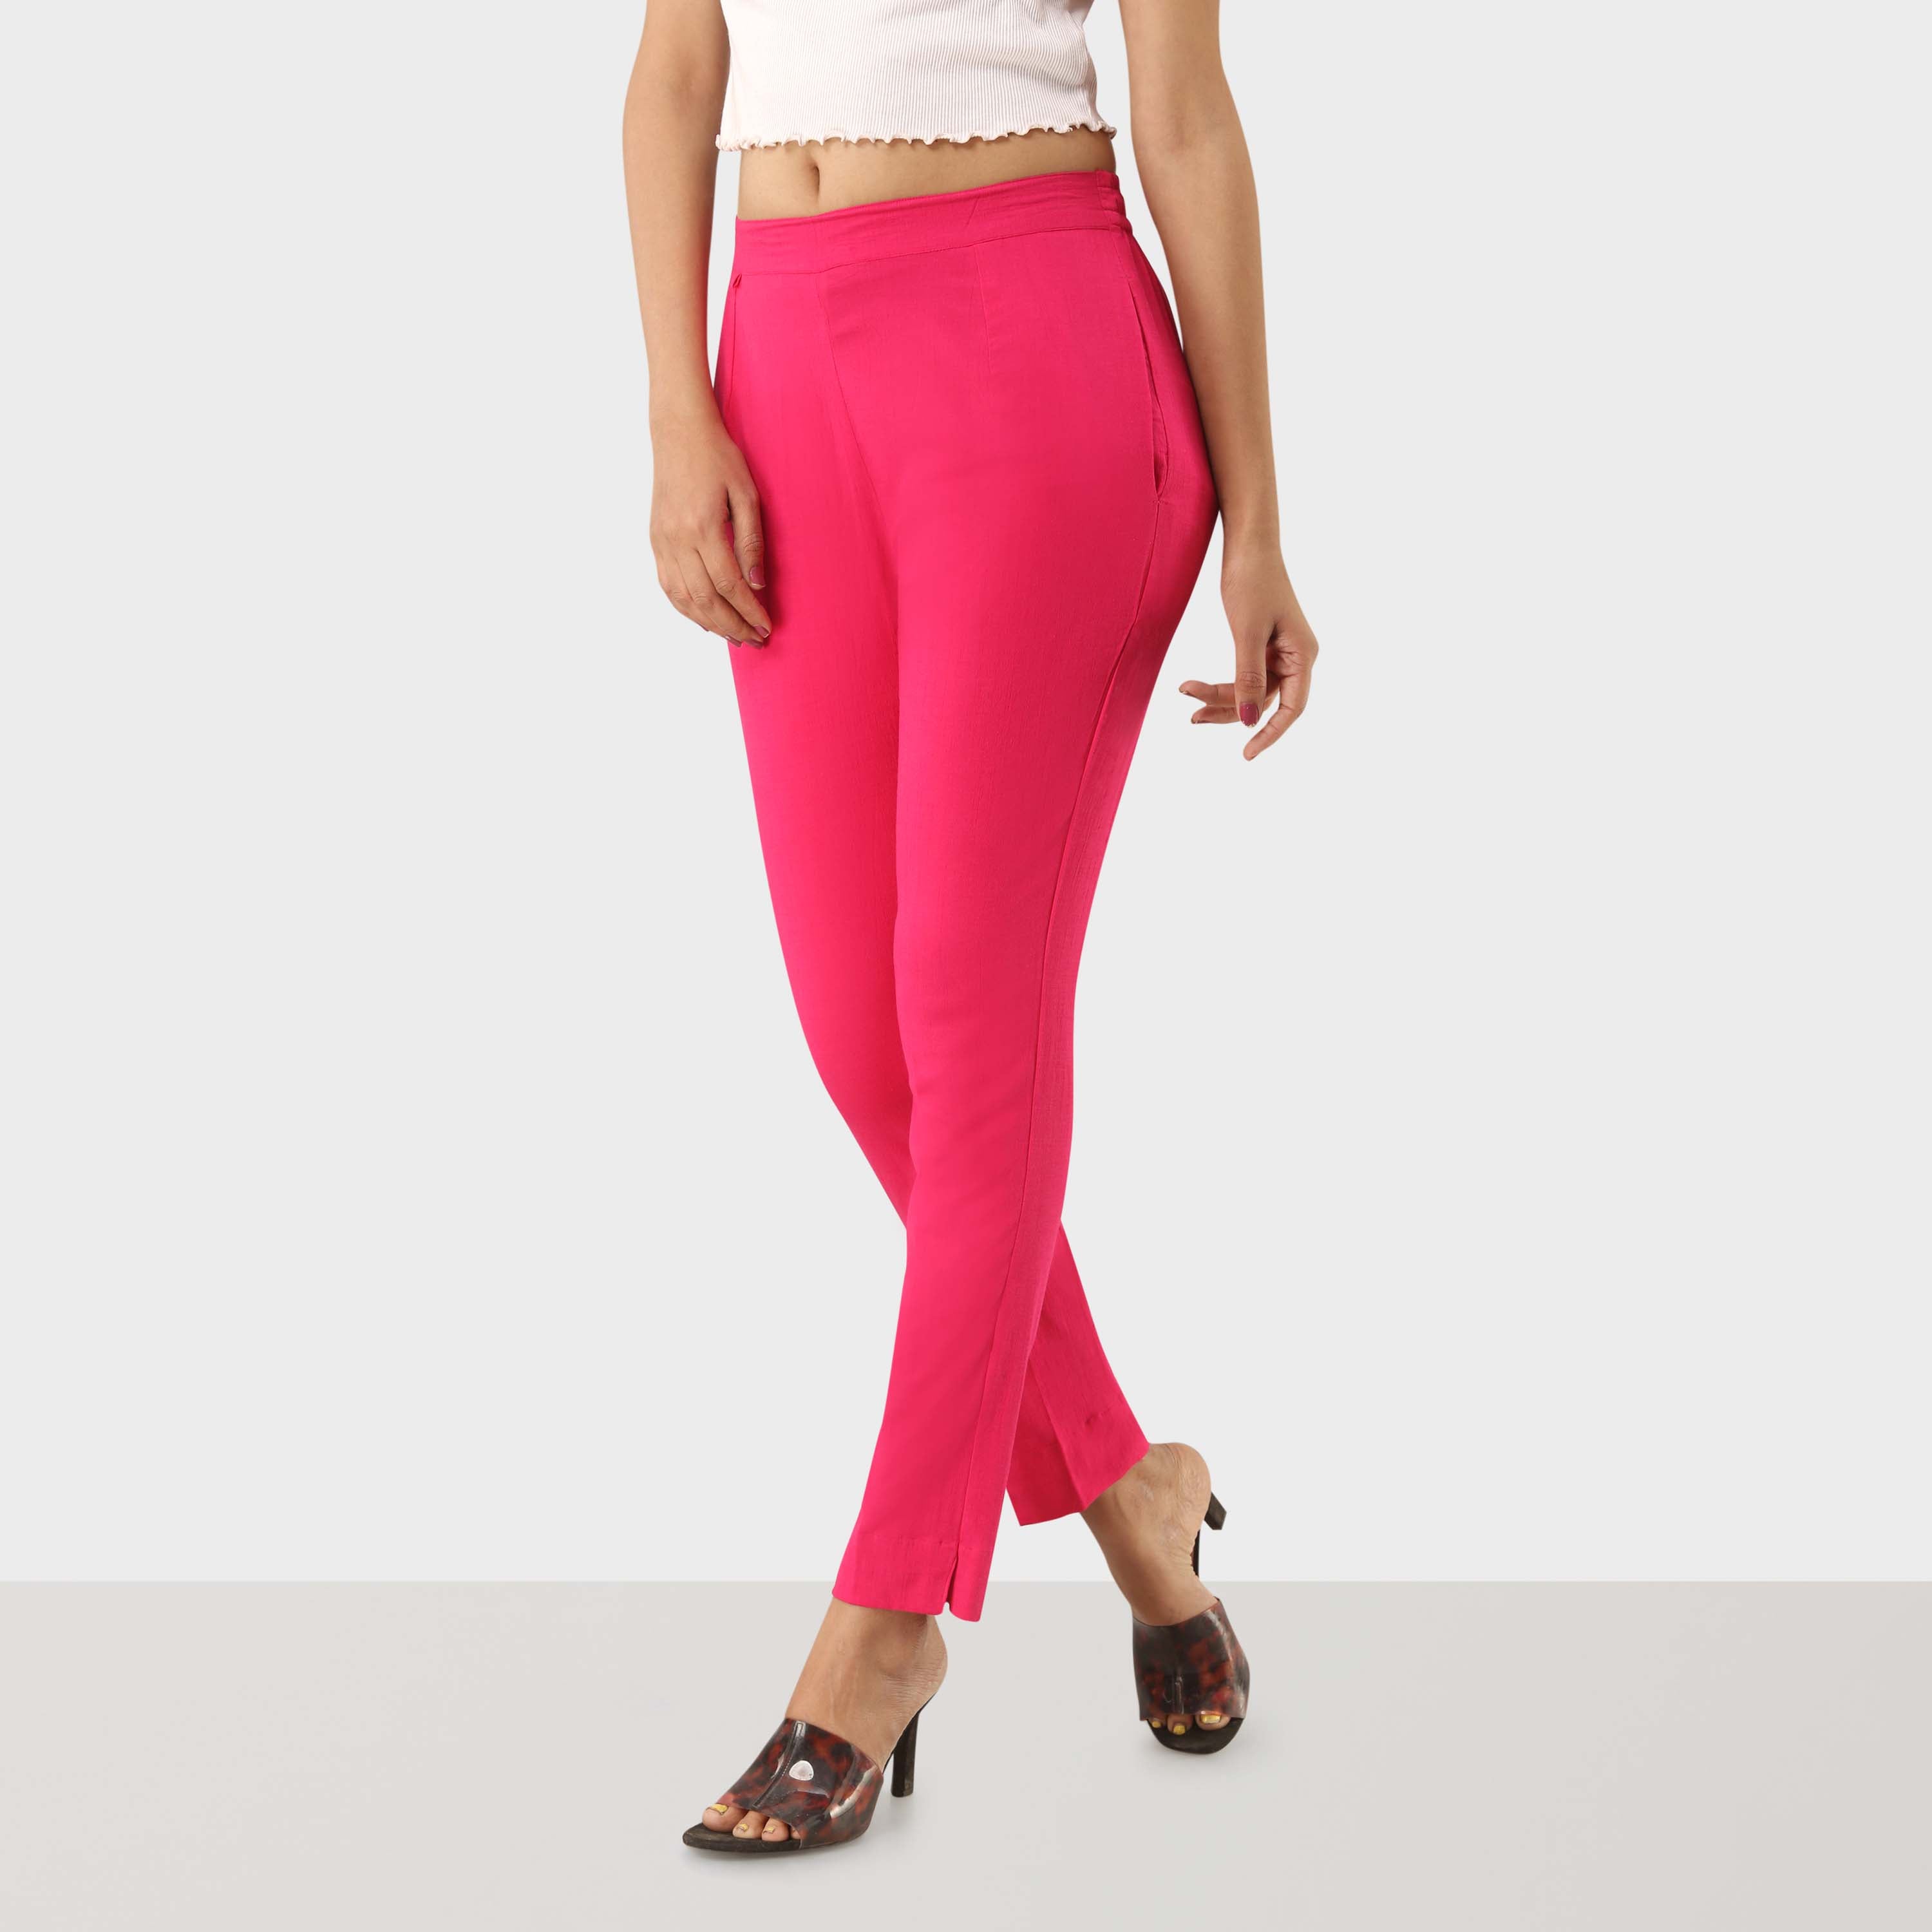 WISHFUL by W Regular Fit Women Pink Trousers - Buy WISHFUL by W Regular Fit Women  Pink Trousers Online at Best Prices in India | Flipkart.com